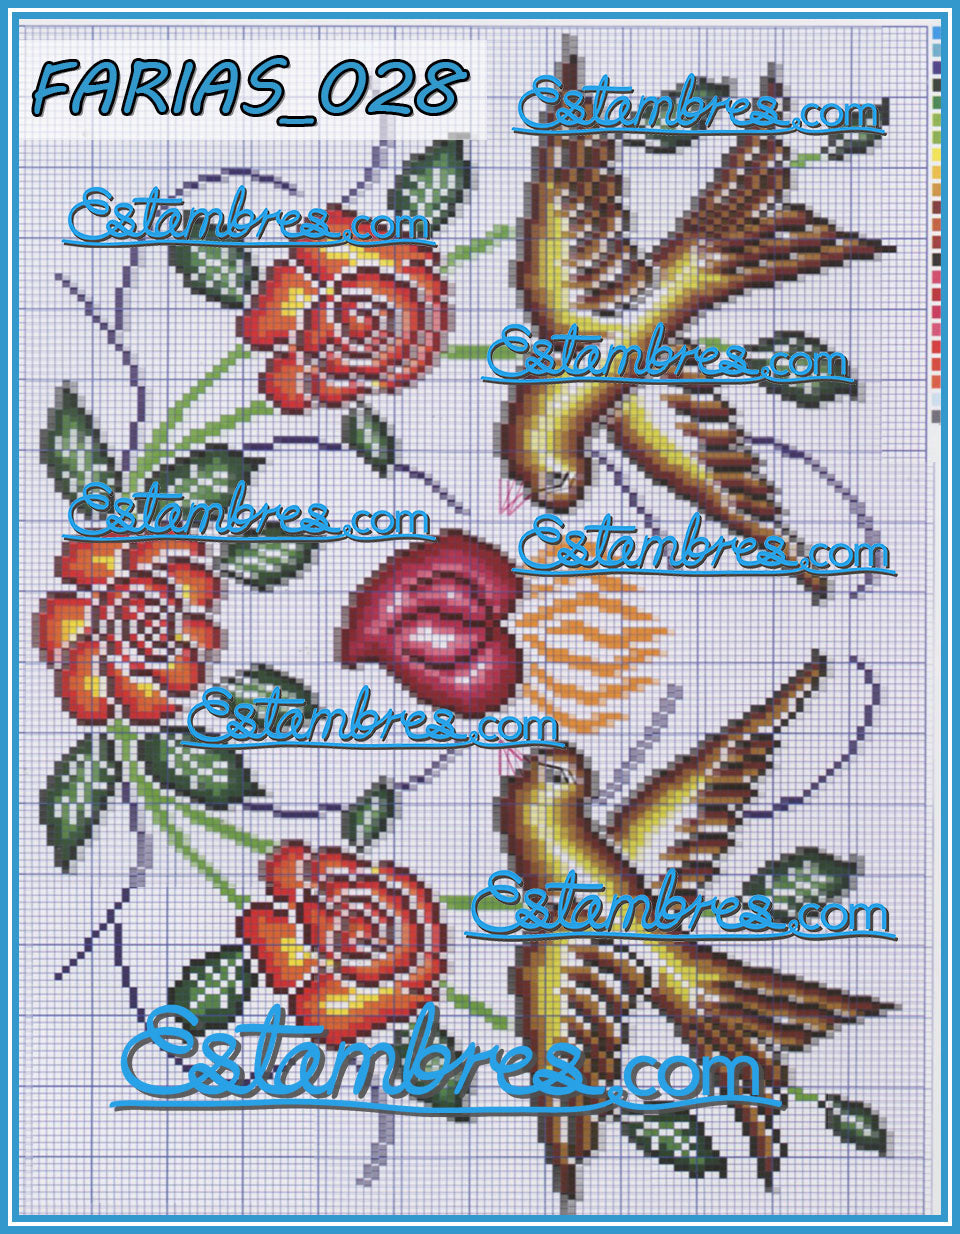 Farias Acordeon Book [29-52] - 2 of 2 - Embroidery Pattern, Crewel Stitch  Embro